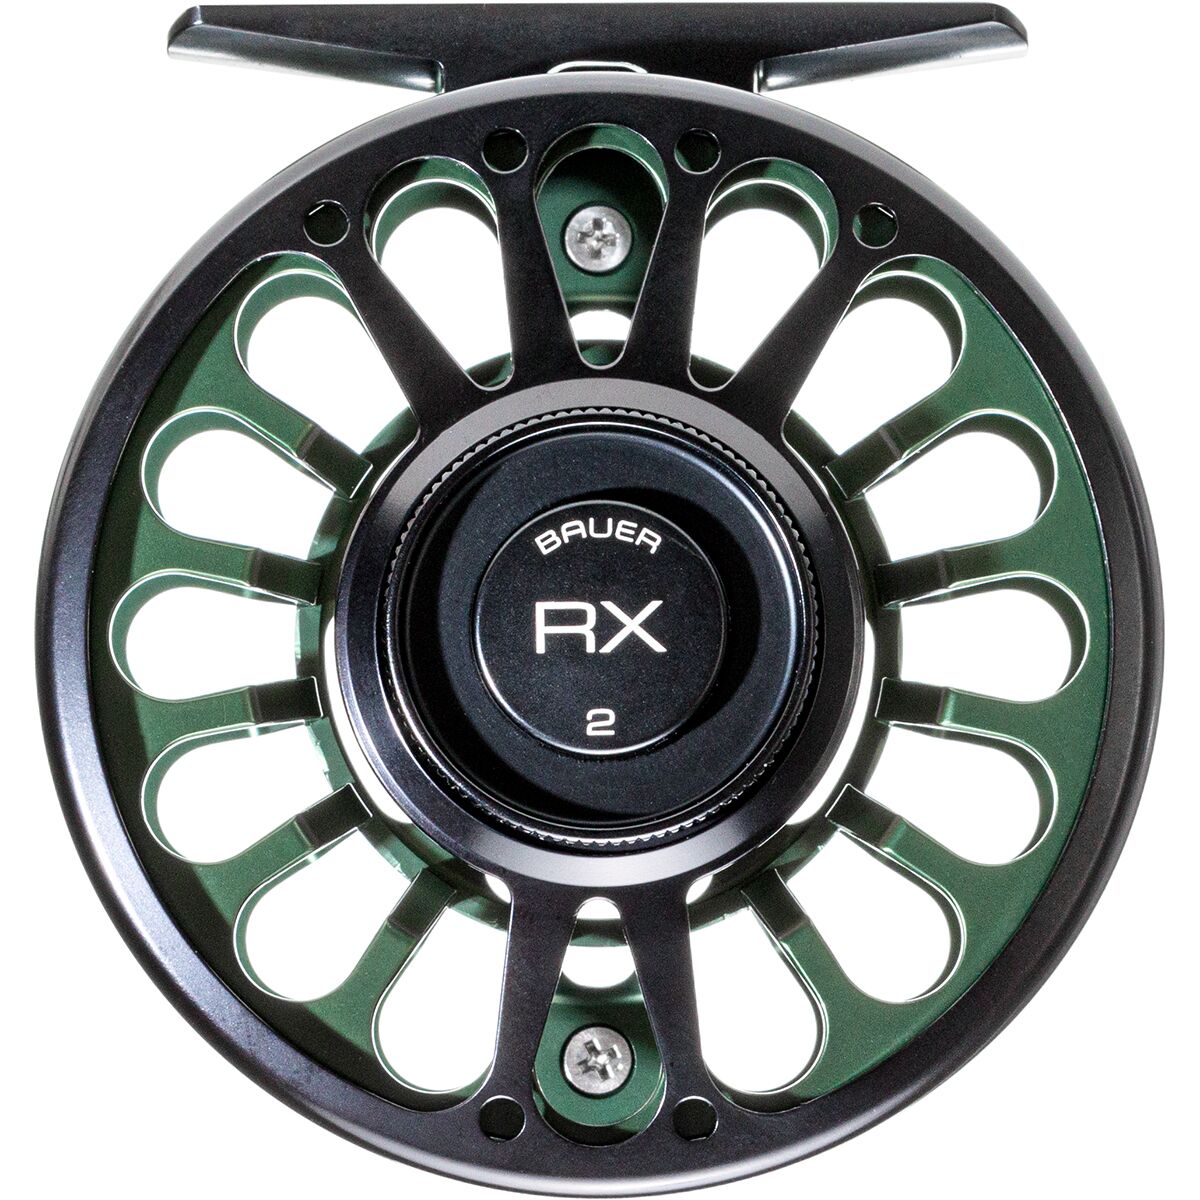 Gently Bauer Rx5 Fly Fishing Reel Black 7-9wt EXCELLNT Shape for sale  online